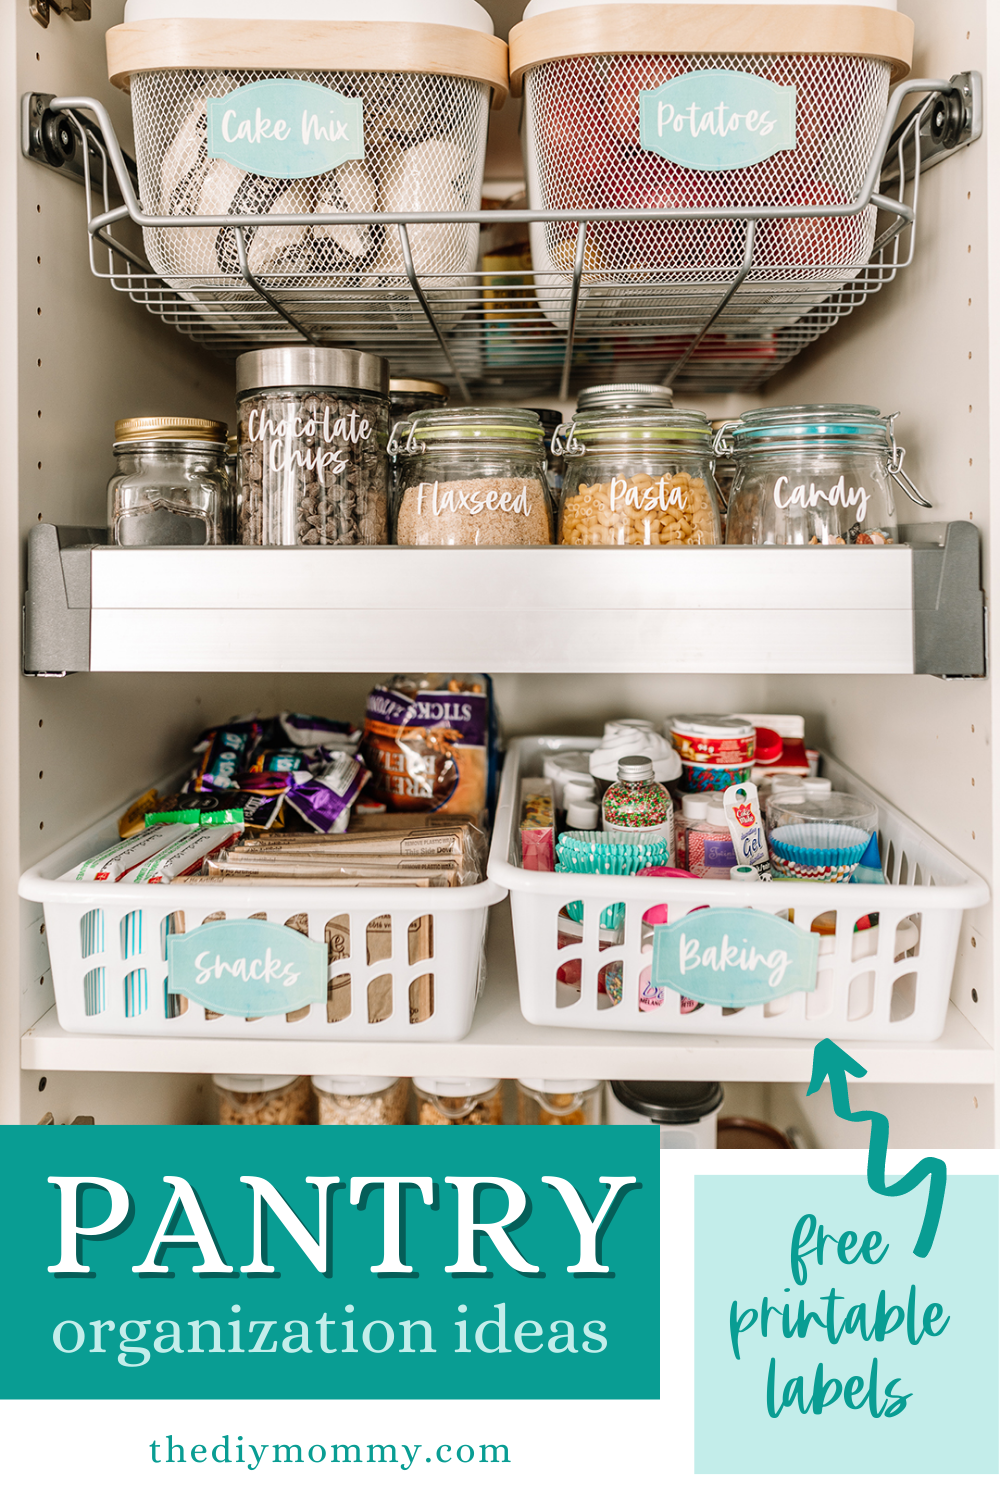 https://thediymommy.com/wp-content/uploads/2020/01/DIYM-small-pantry-option-1.png.png